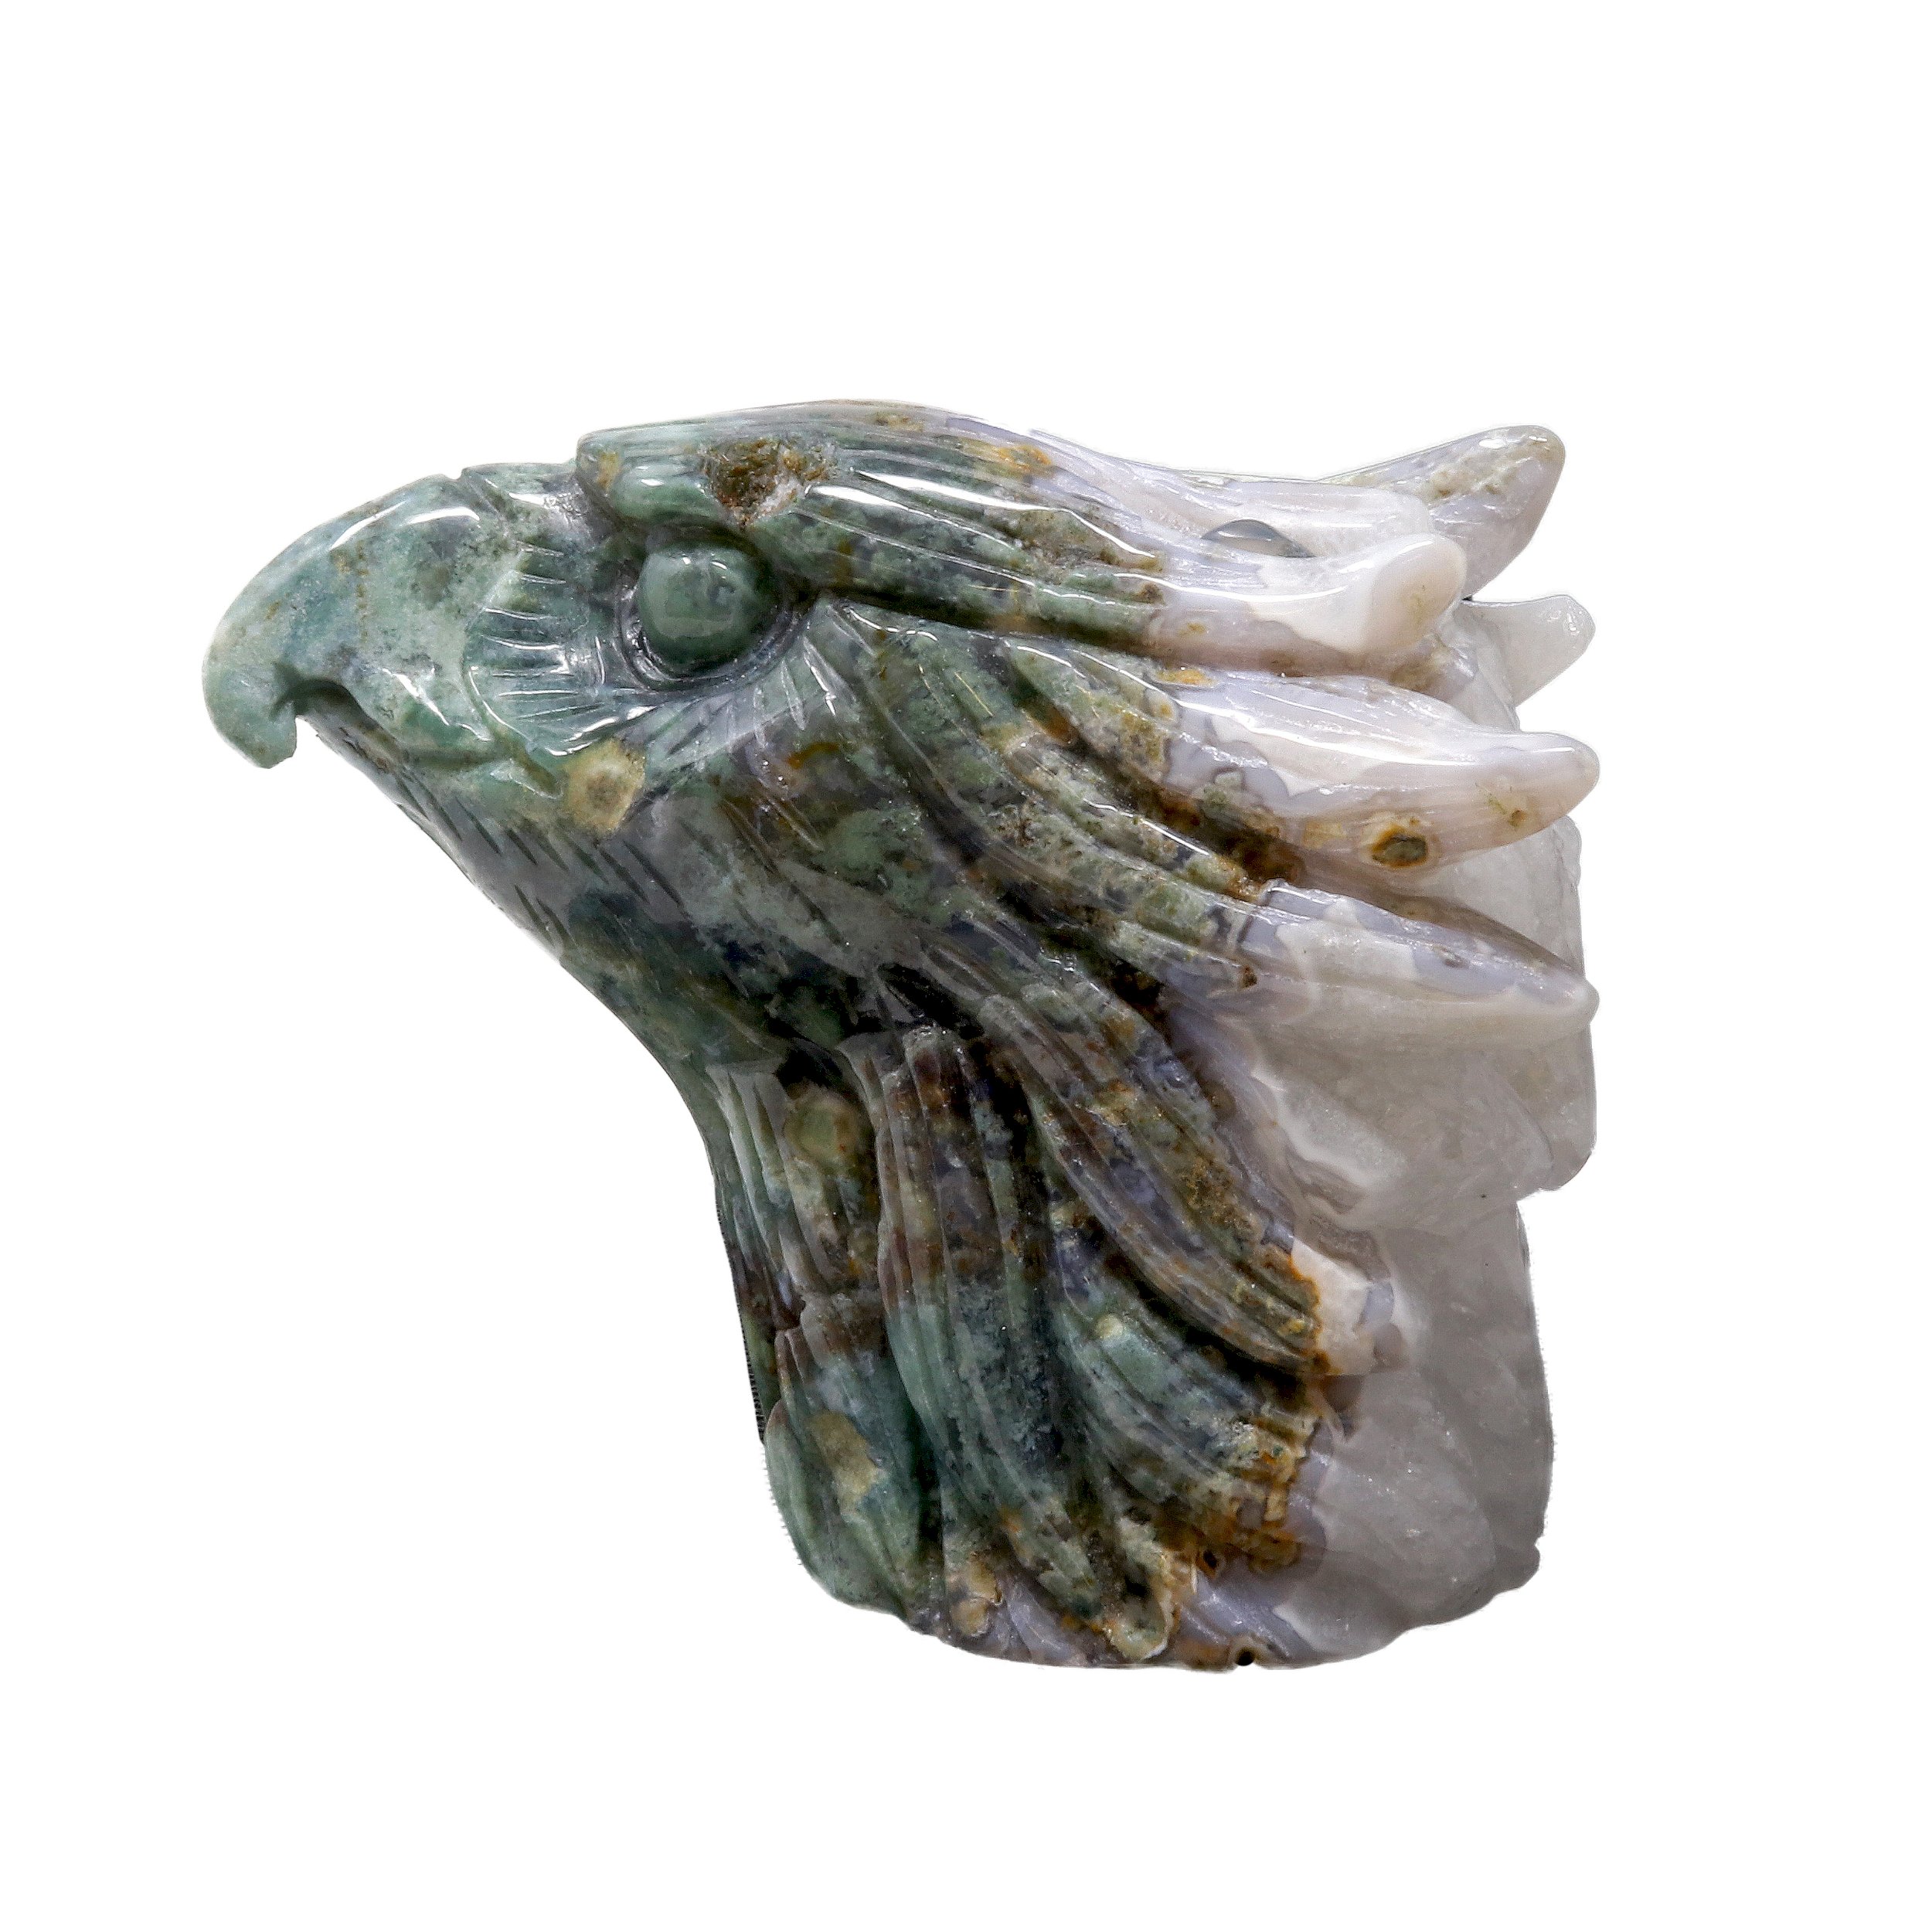 Agate Geode Eagle Head Carving - Moss Agate With White Druze Vugs